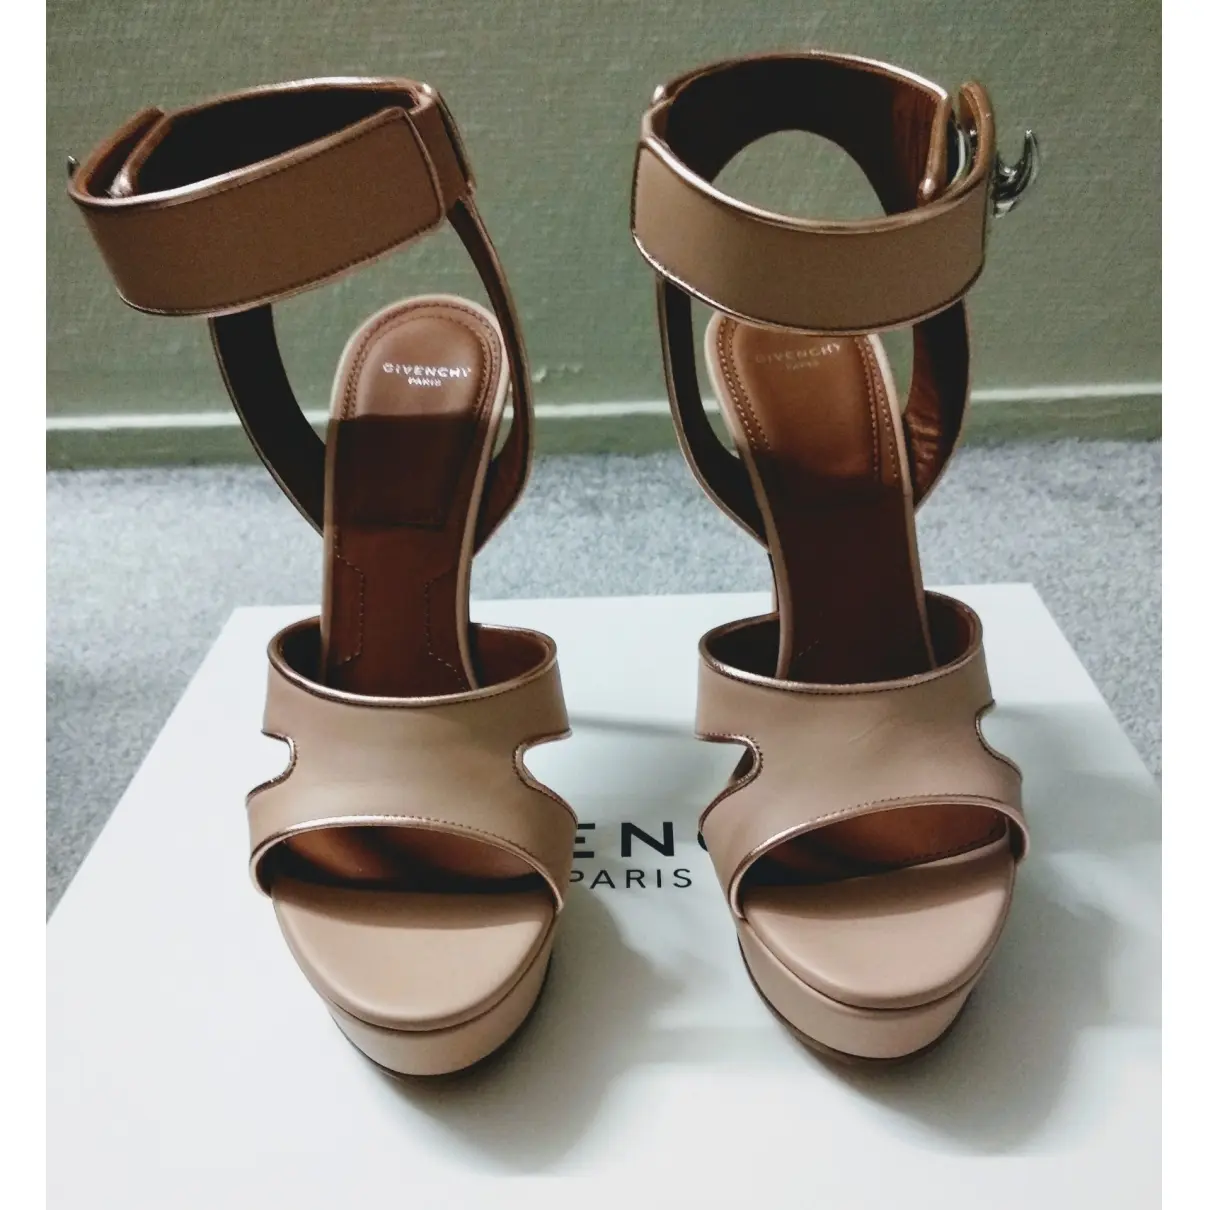 Buy Givenchy Shark leather sandals online